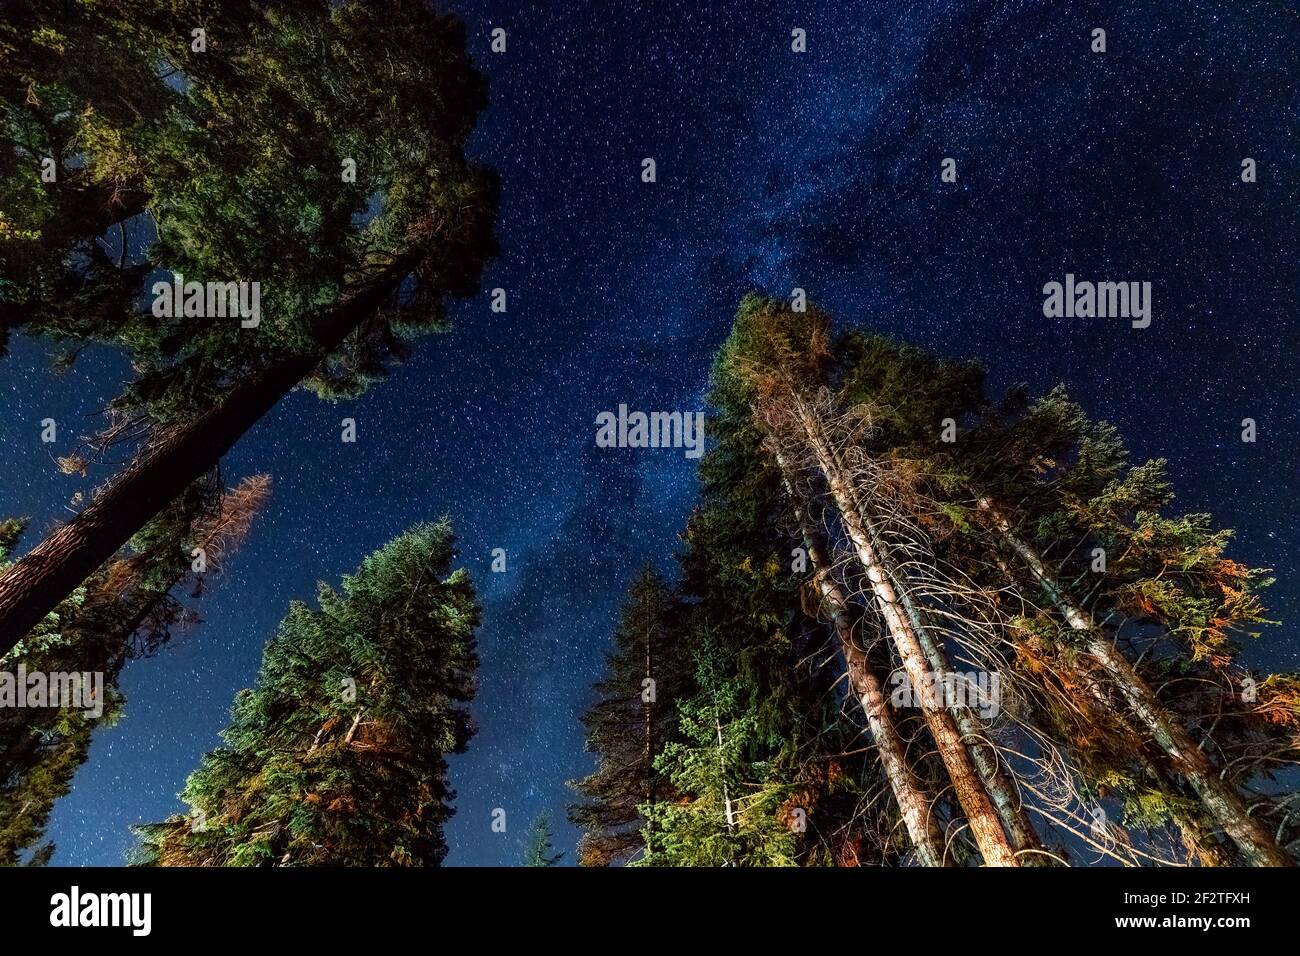 A view of the stars with pine trees forest in the foreground. Night shooting in the forest. Stock Photo